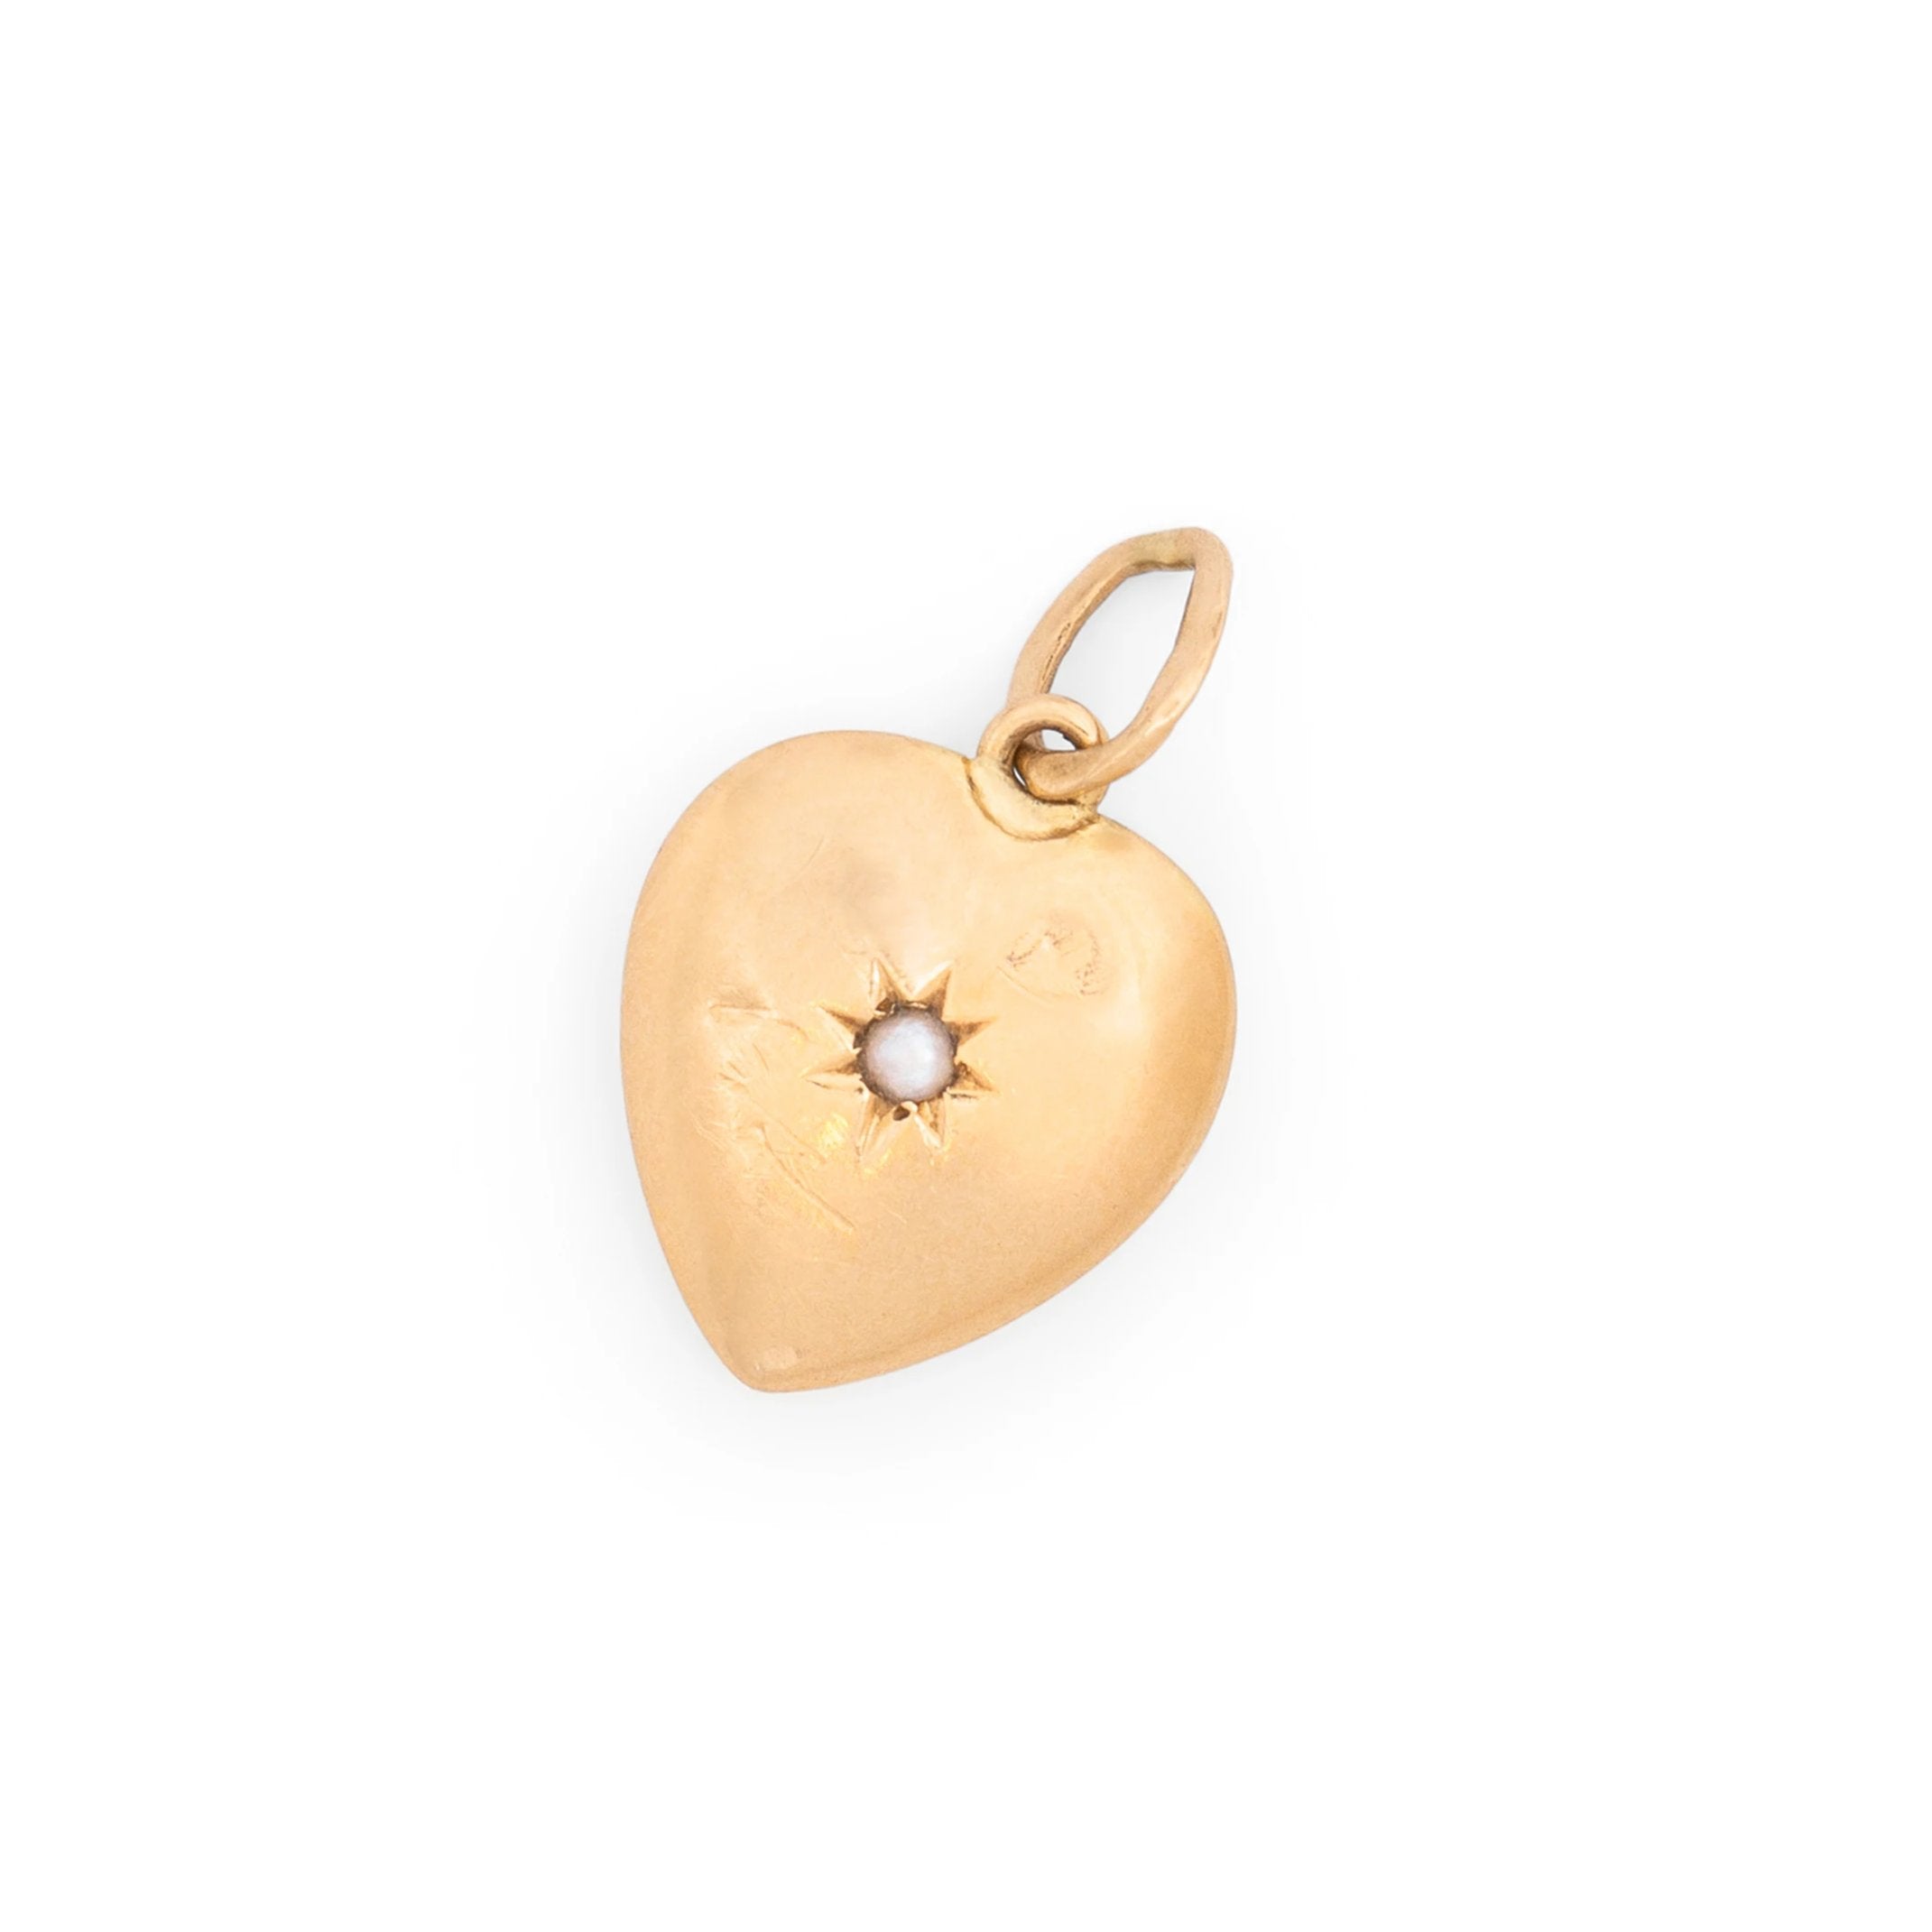 Petite 14K Gold Heart and Pearl Starburst Charm